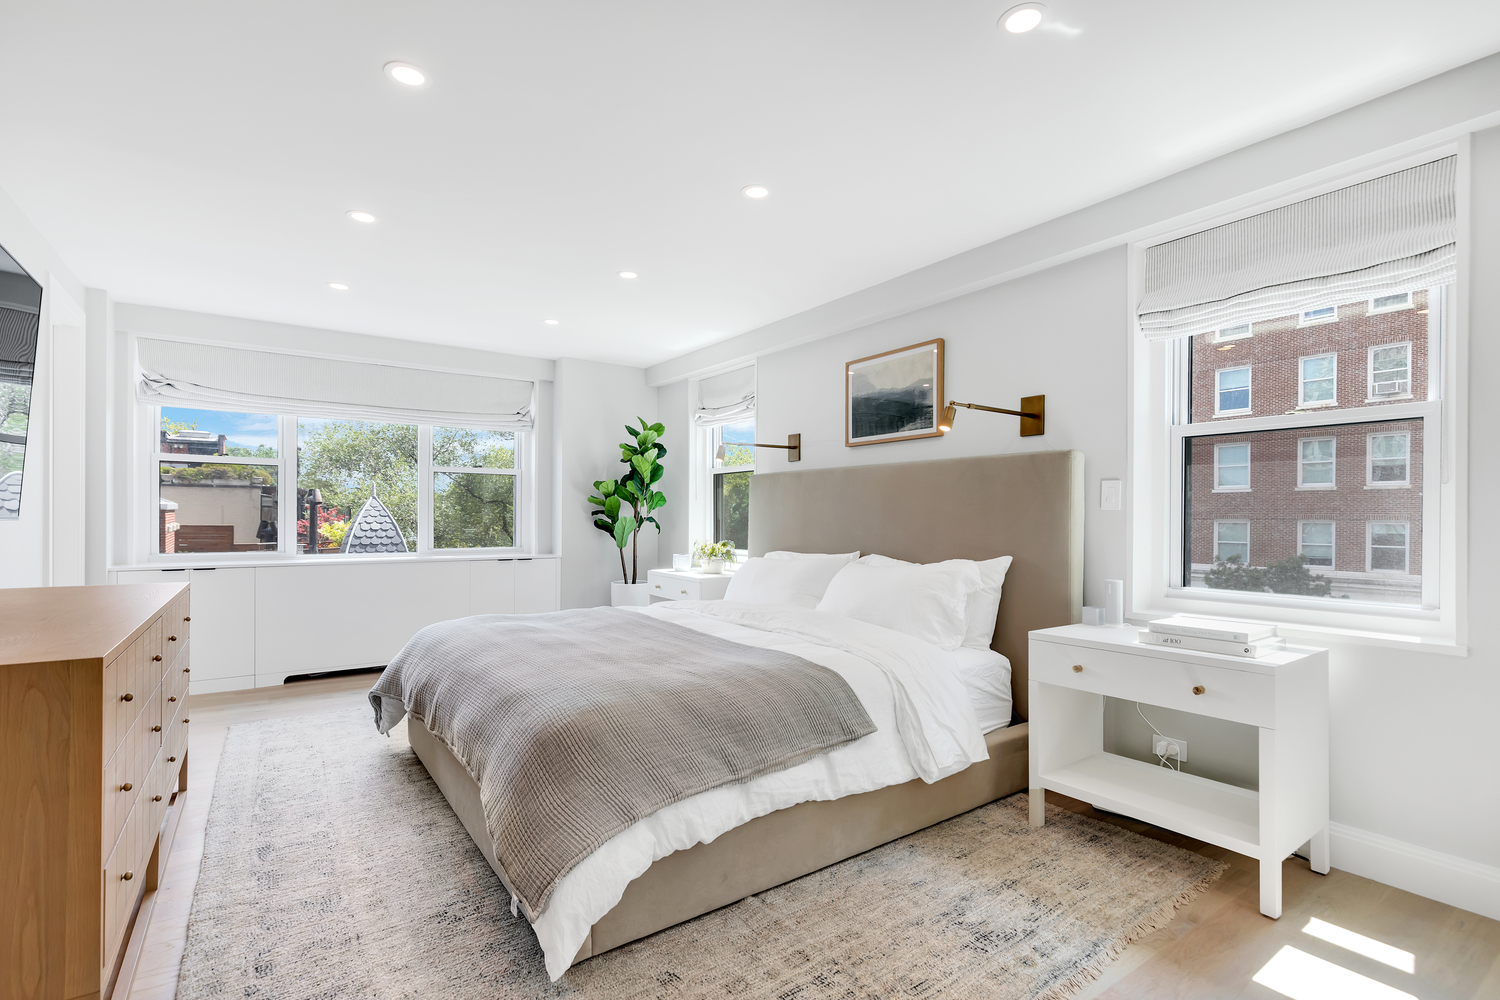 Remodeled bedroom with large windows and recessed lighting.